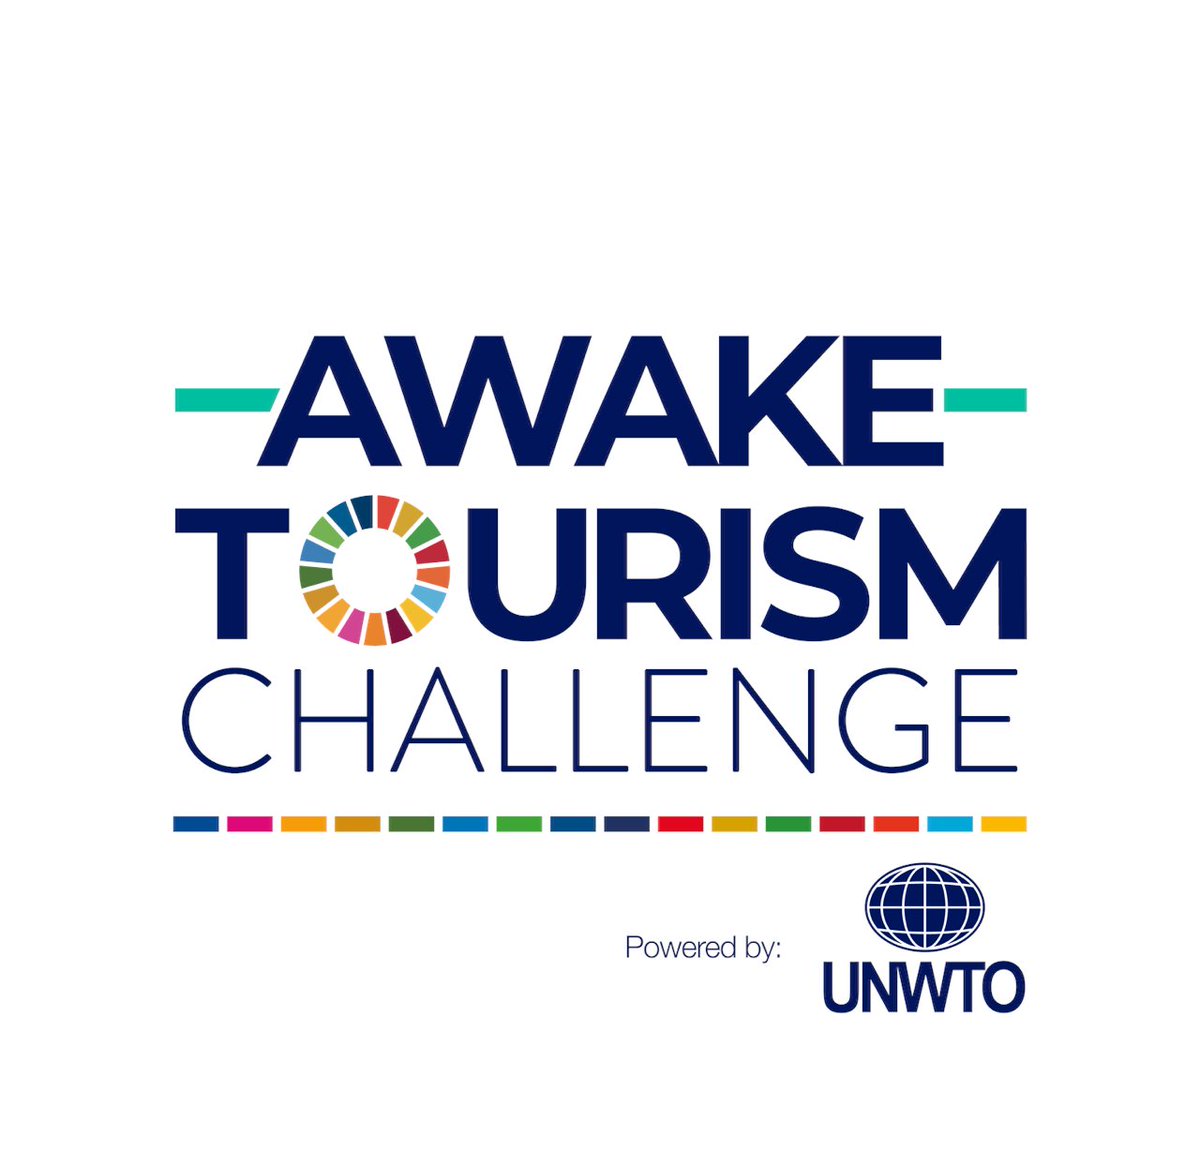 If only I could make the world a bit better...'

Well you can, actually.

🚀Joining UNWTO #AwakeTourismChallenge!

We're inviting all startups seizing top opportunities for change: sustainability, tech, women empowerment, education!